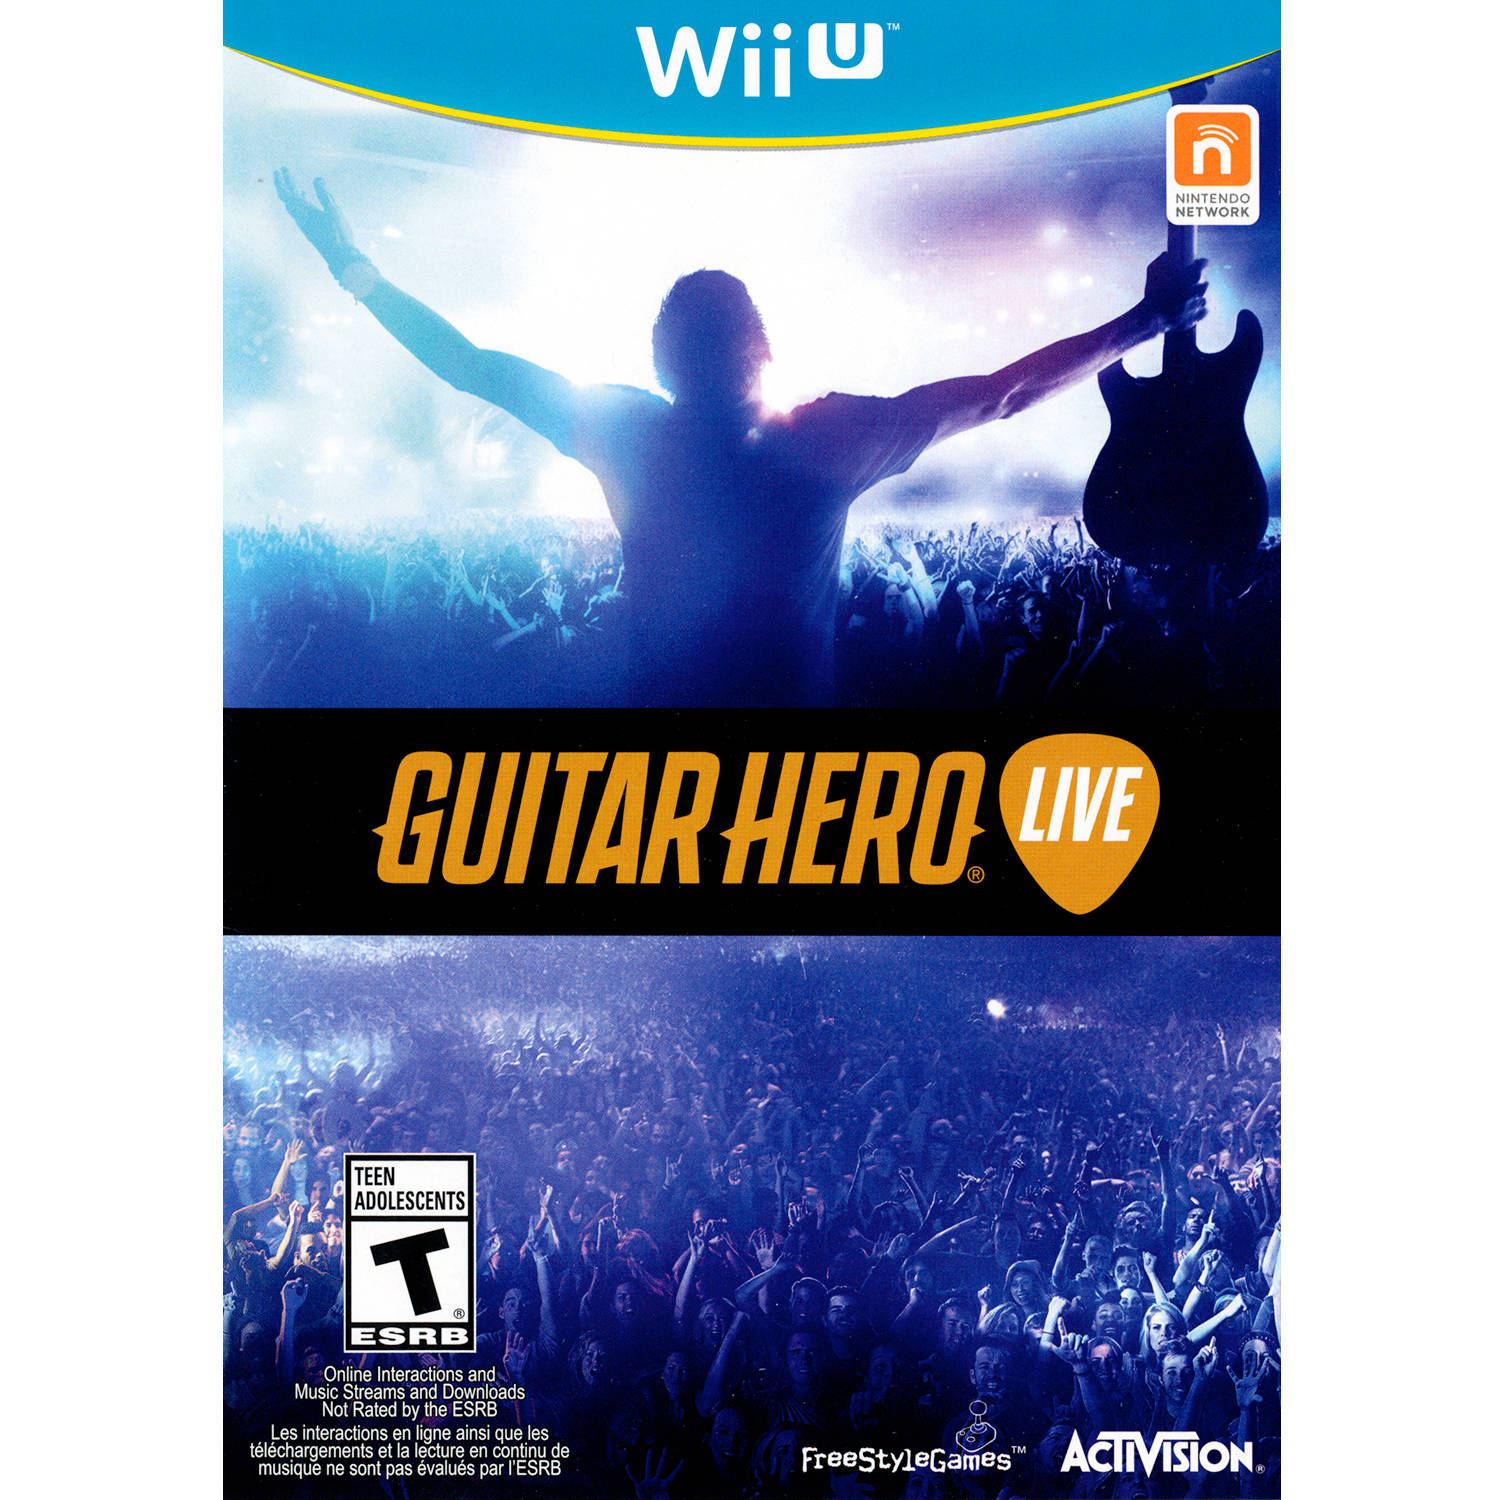 Pre-Owned Guitar Hero Live Game Only (Wii U) - Pre-Owned (Refurbished: Good) - image 1 of 1